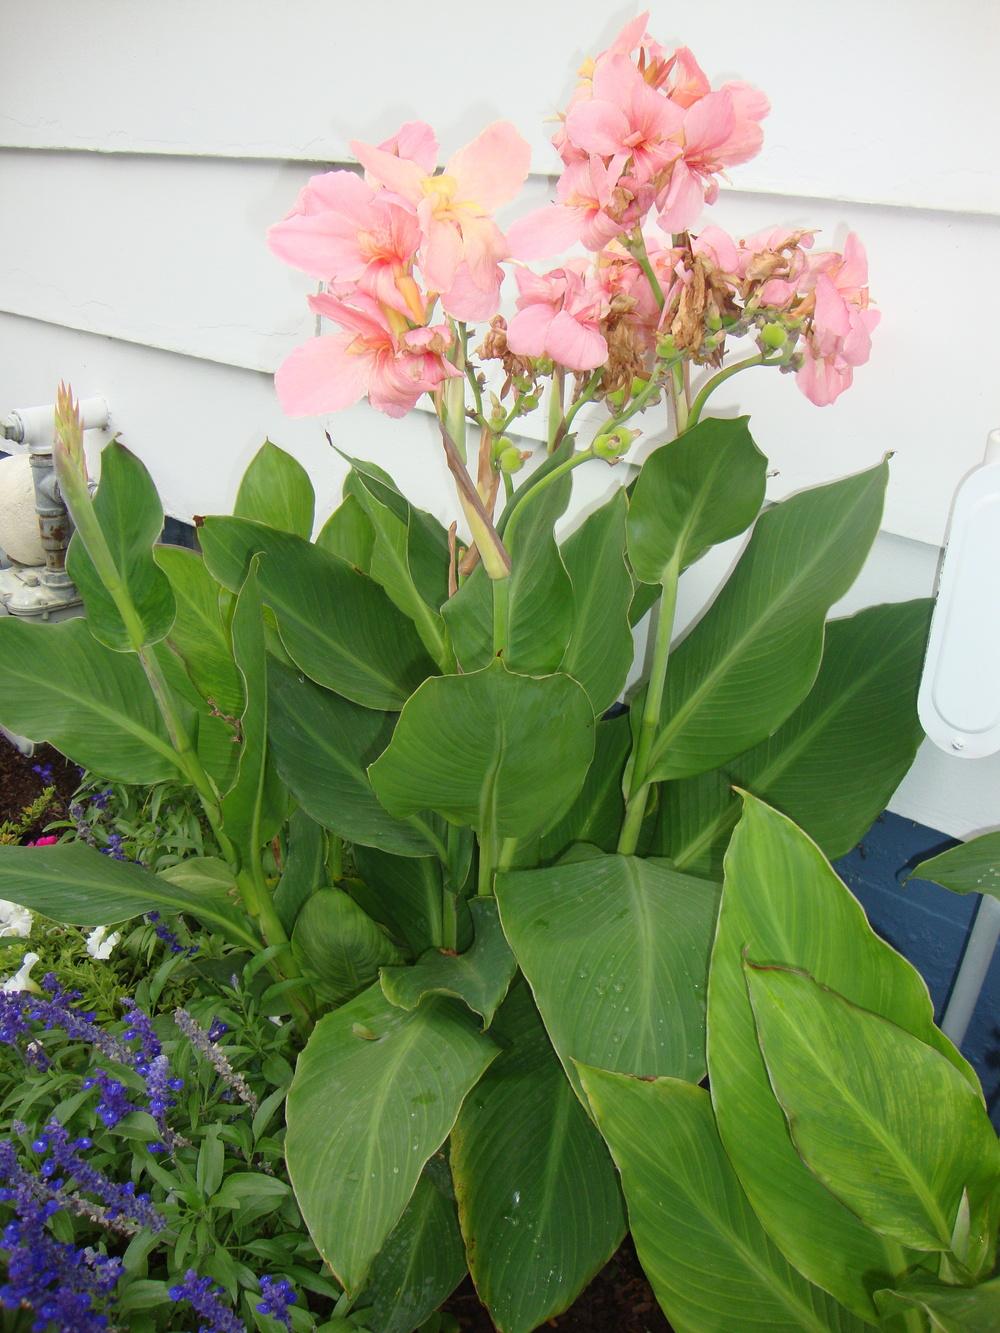 Photo of Cannas (Canna) uploaded by Paul2032